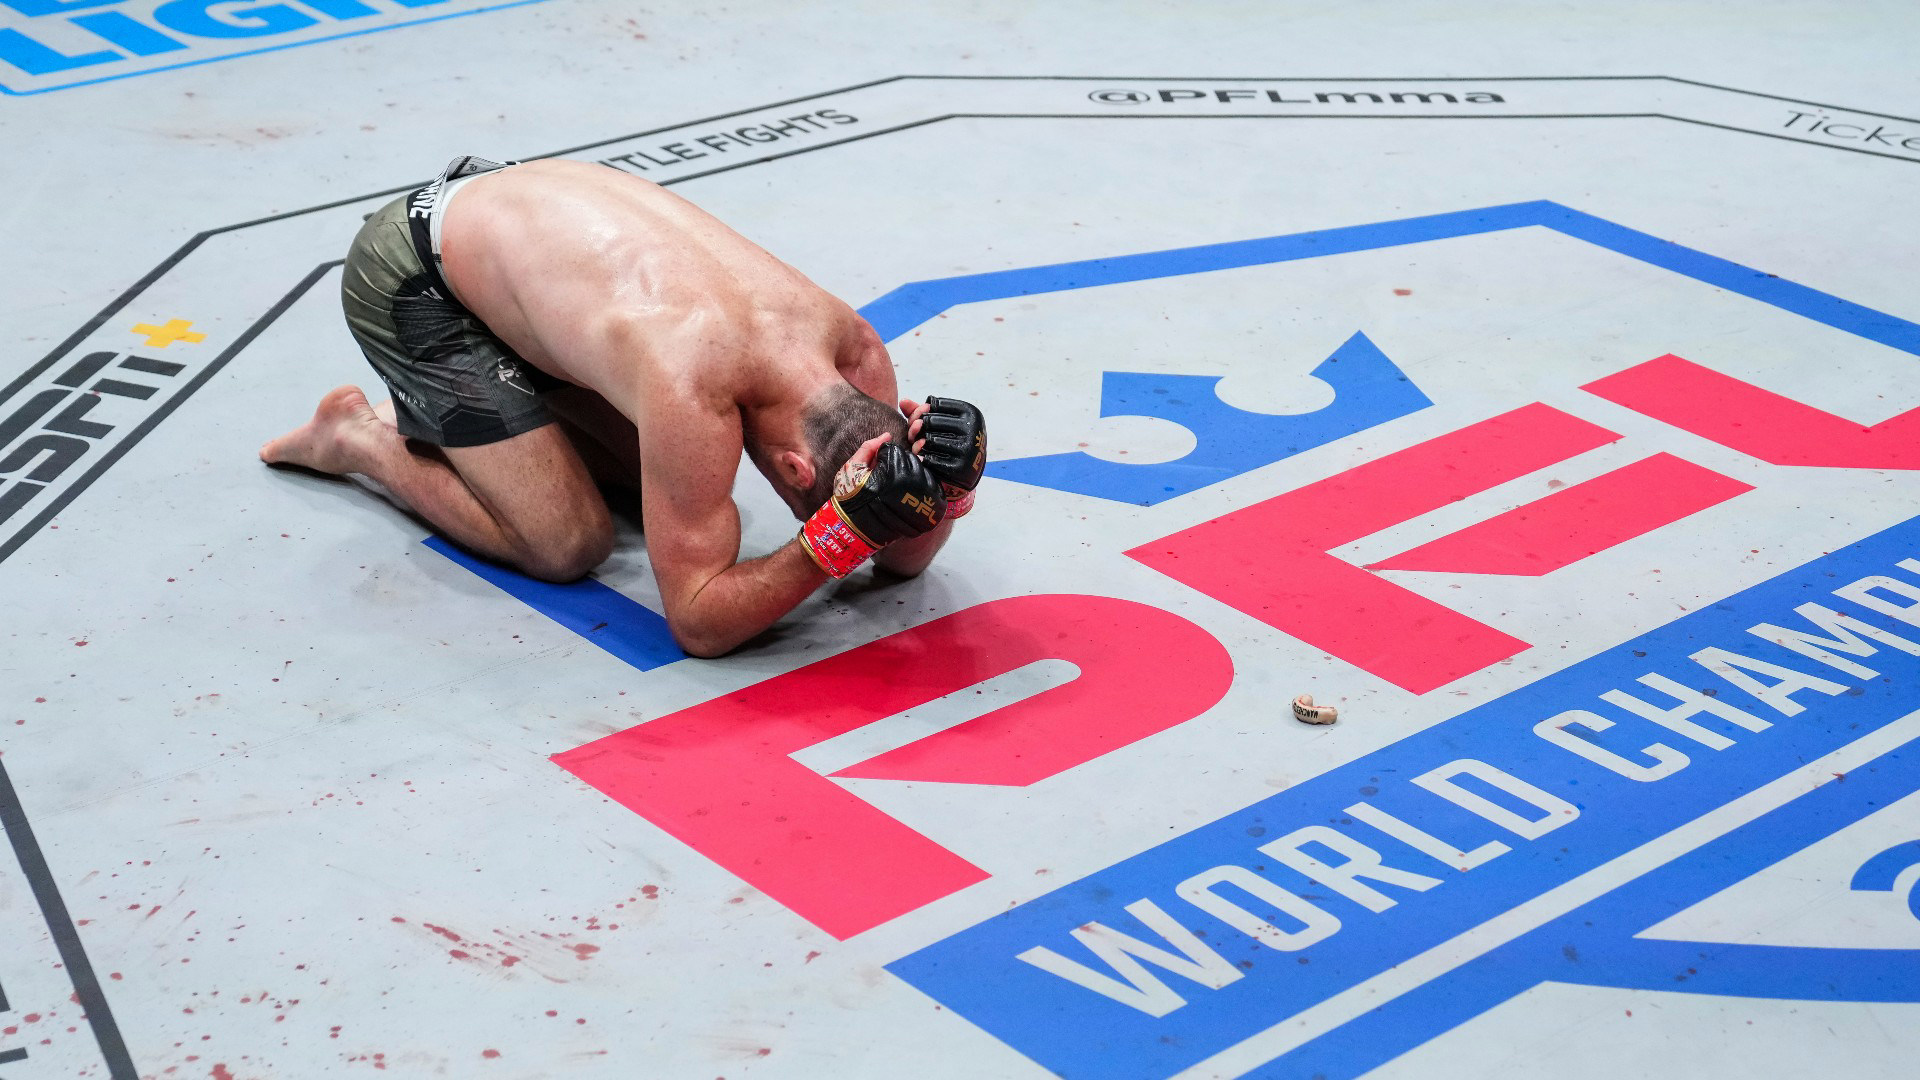 PFL World Championship predictions, expert picks, top fighters to watch